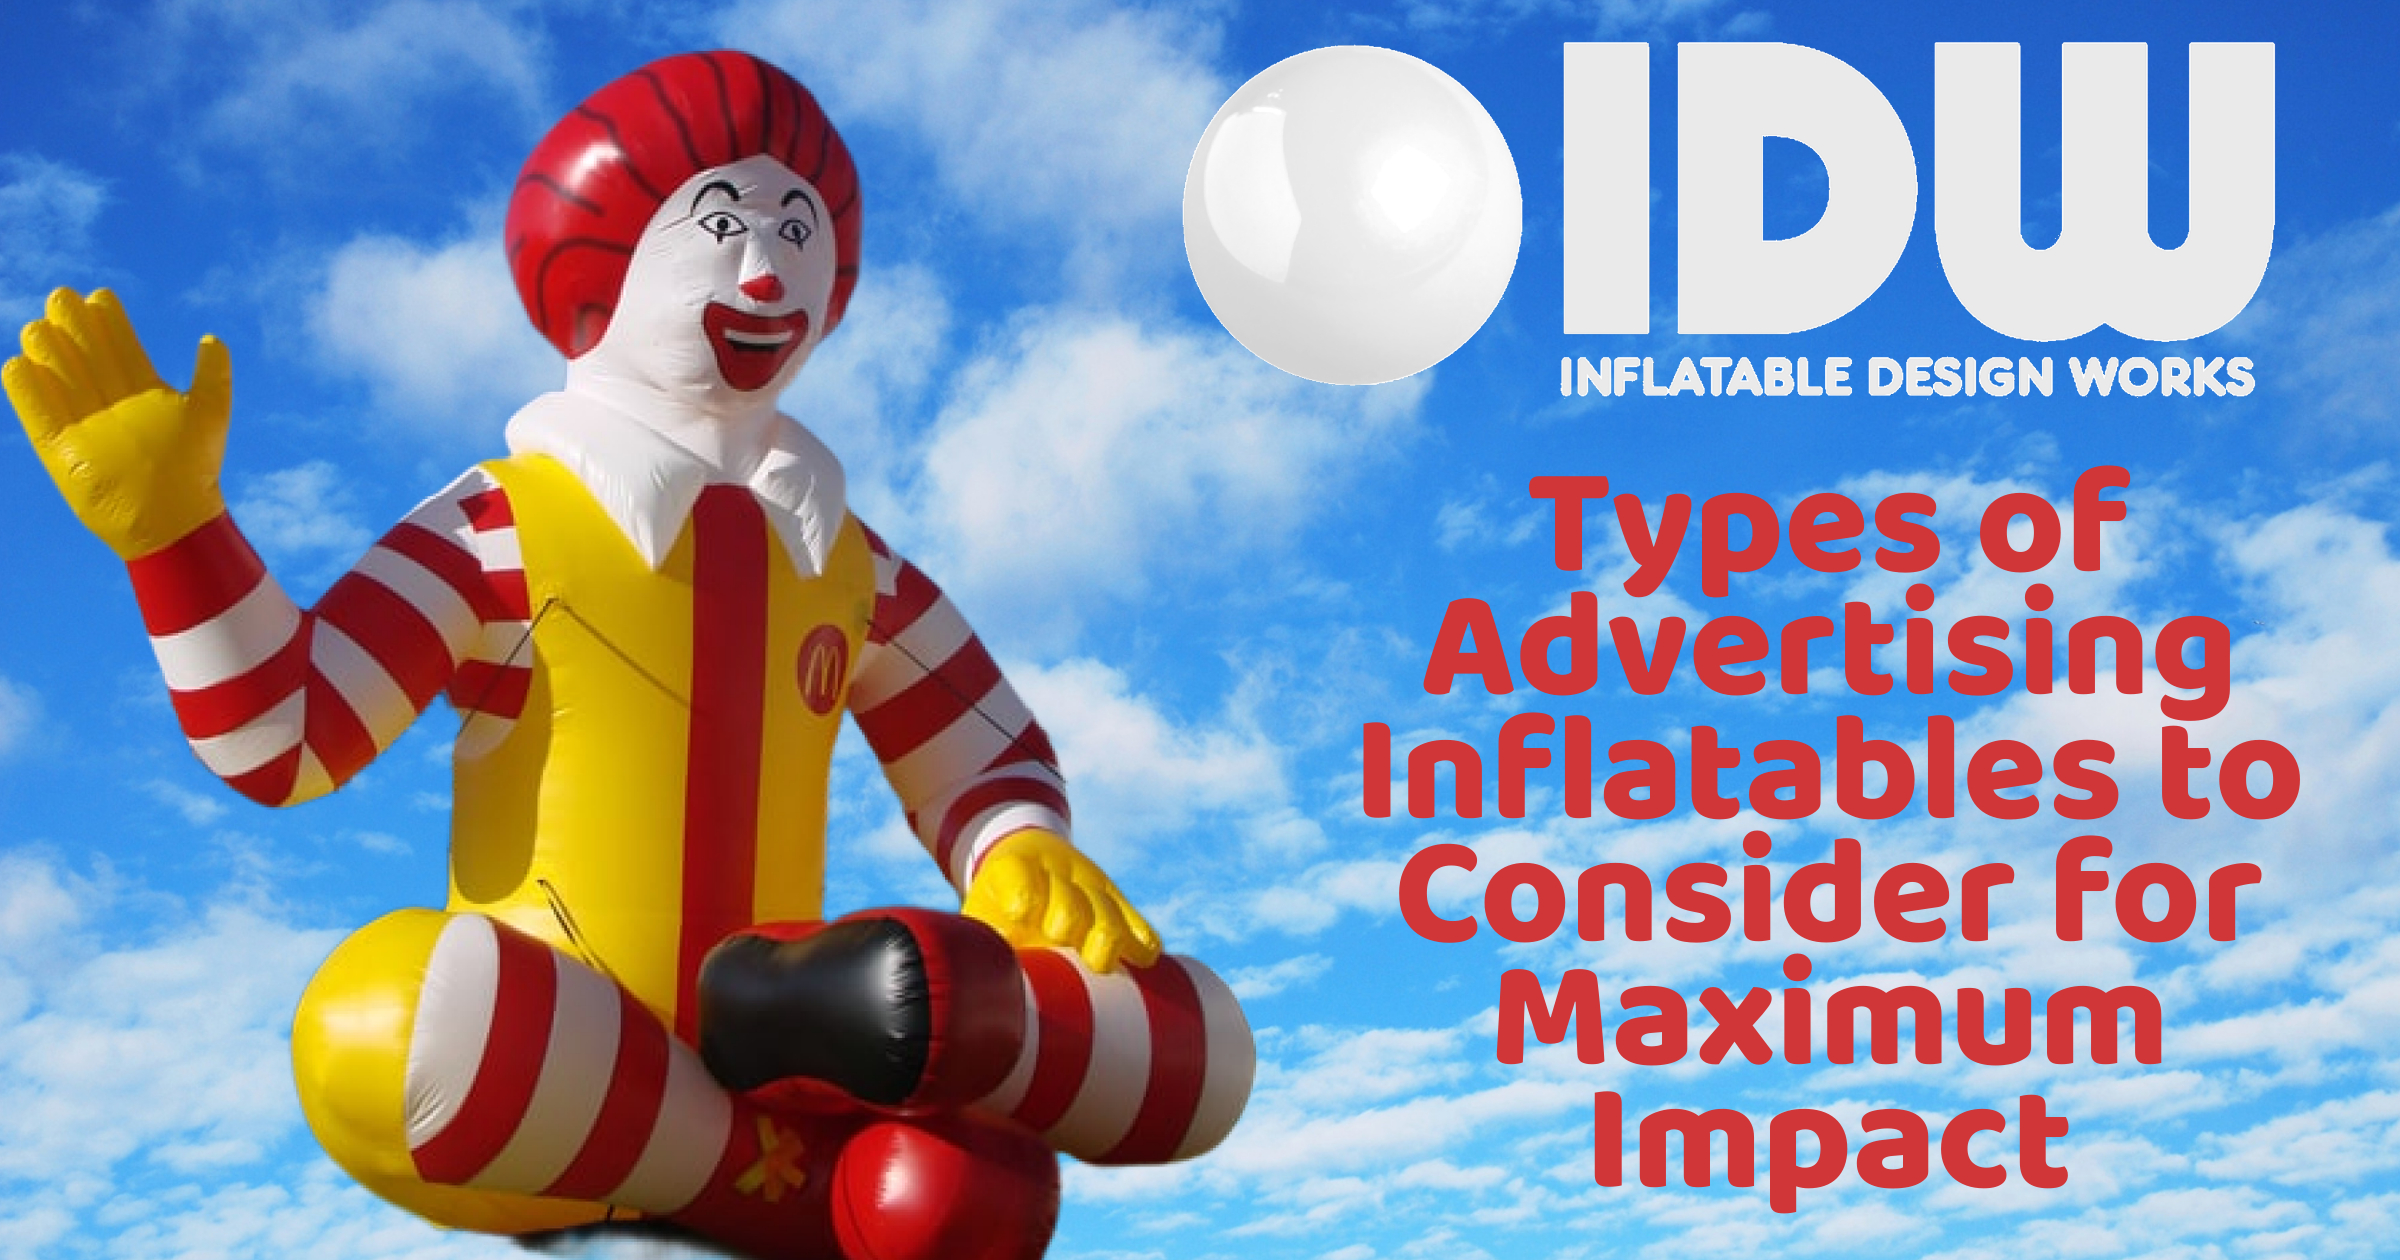 Types of Advertising Inflatables to Consider for Maximum Impact